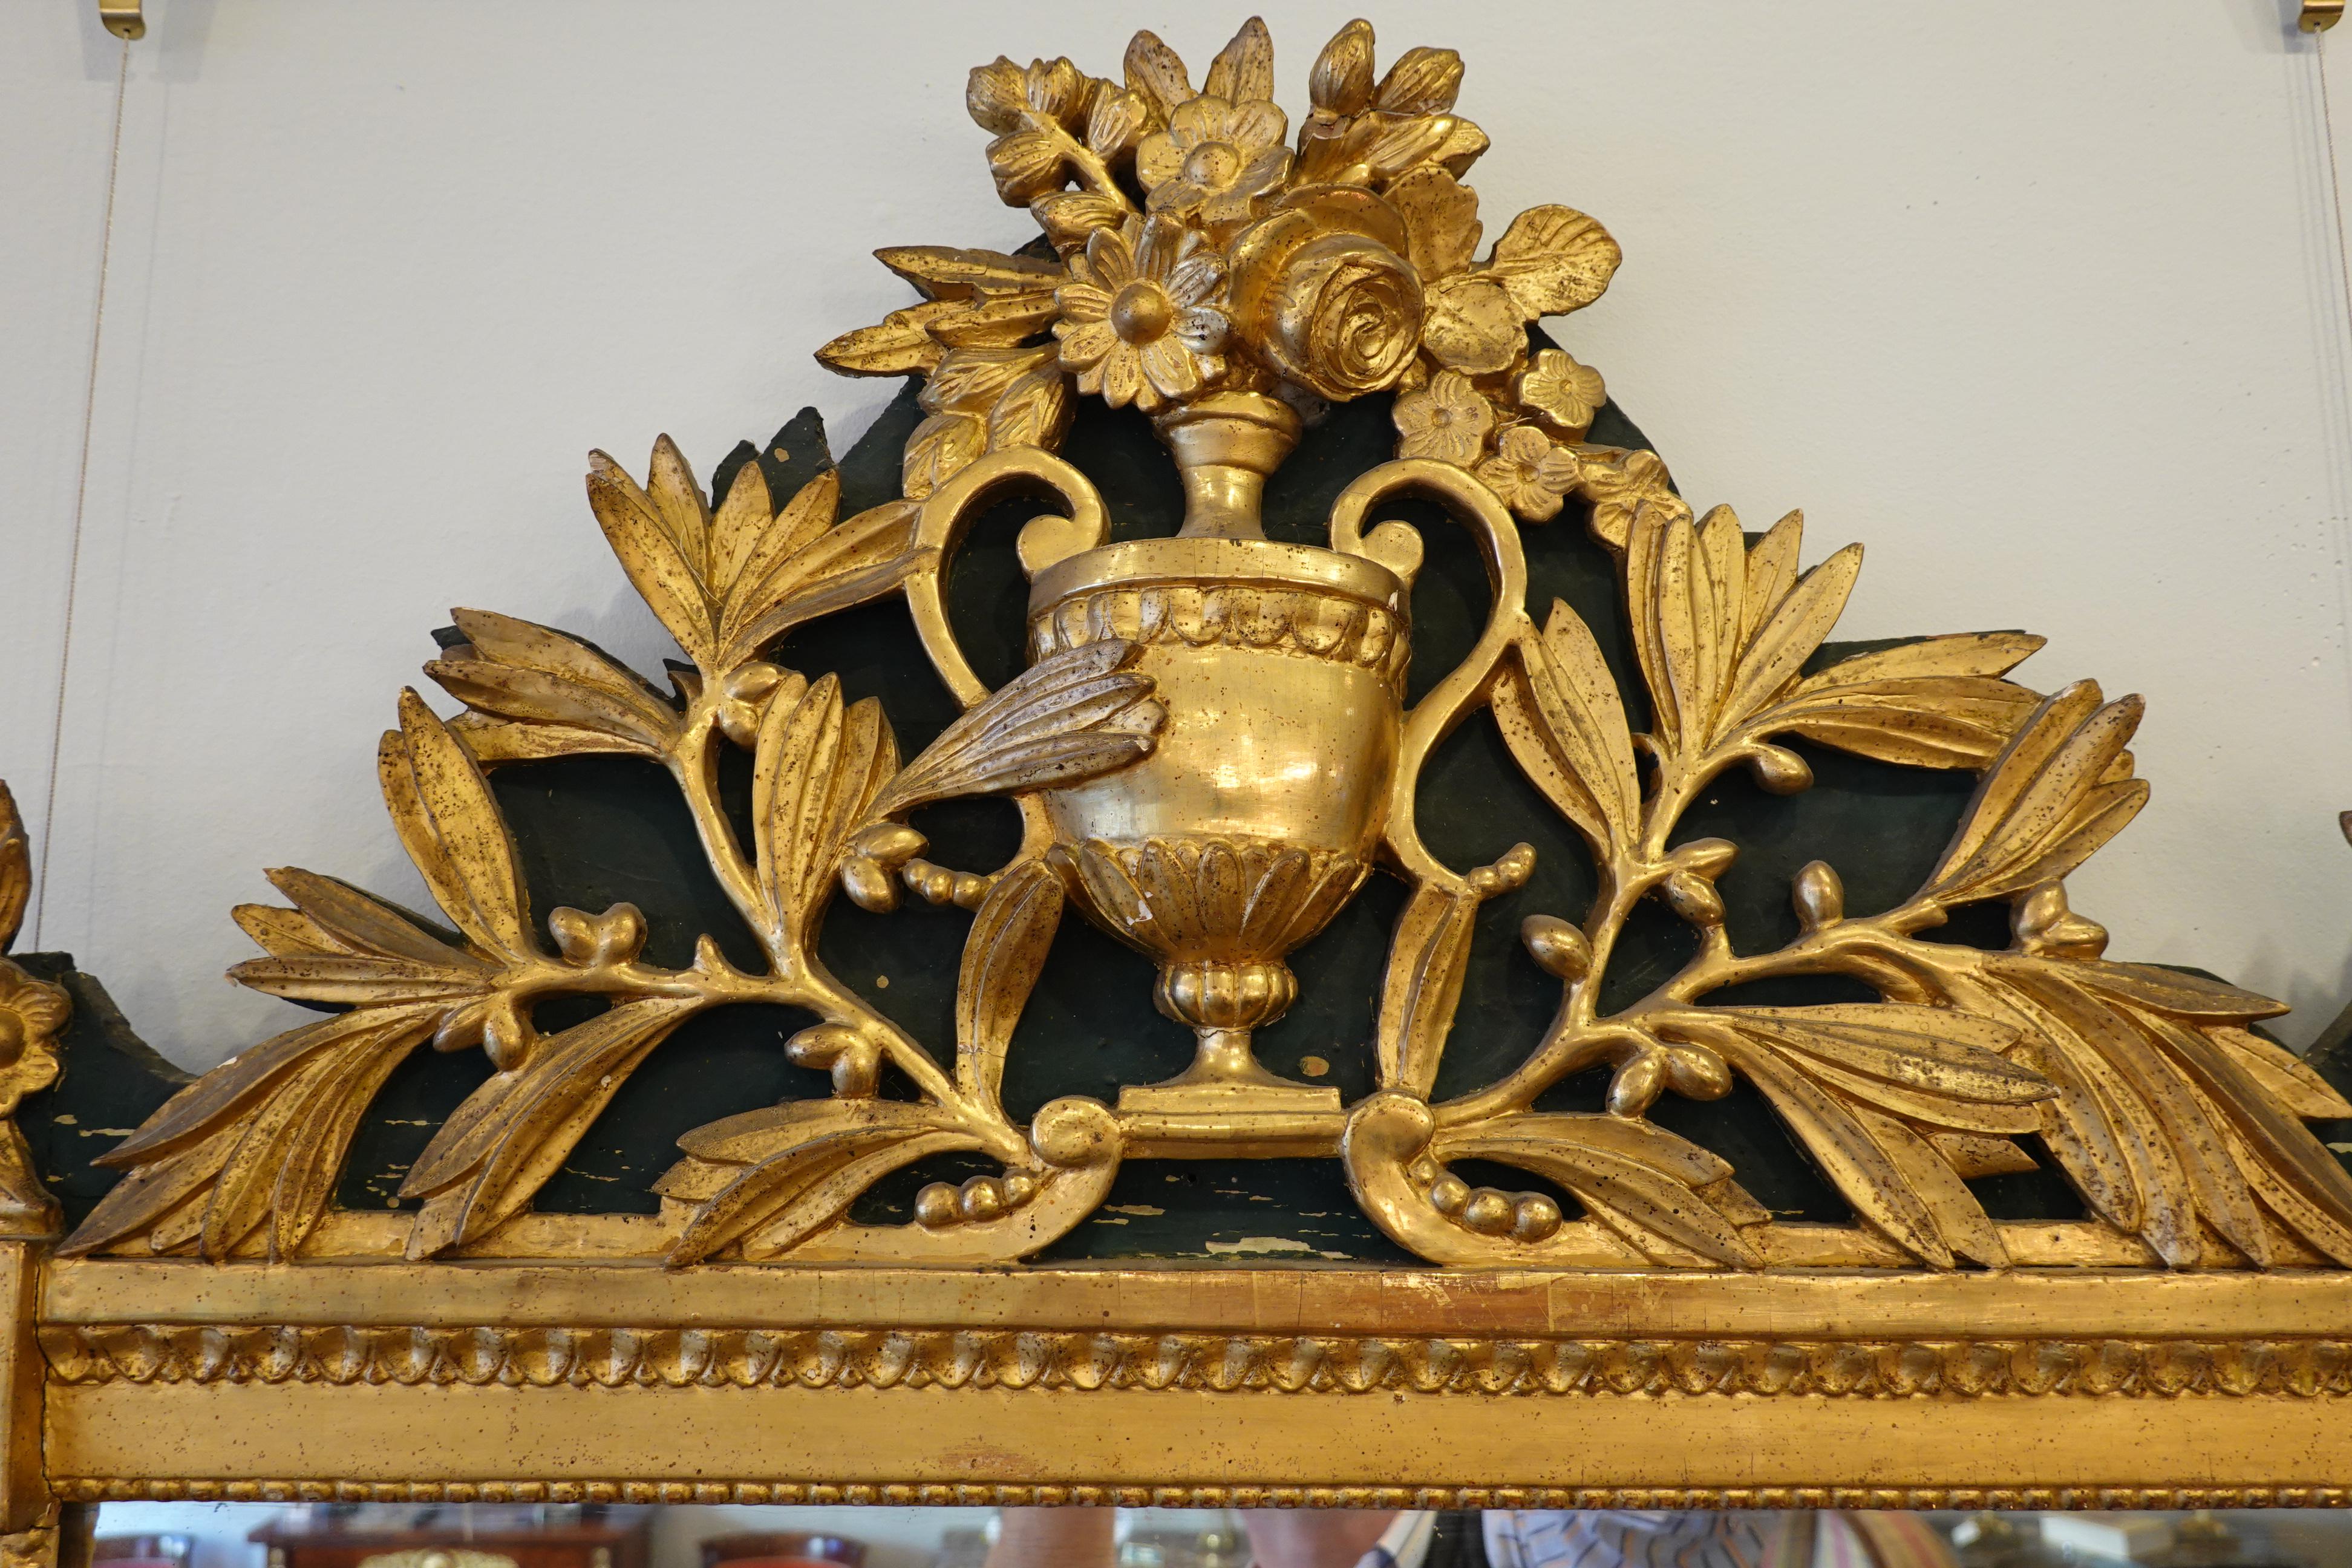 Louis XVI Period Giltwood Trumeau Mirror with Urn, Flowers and Laurel Leaves For Sale 1